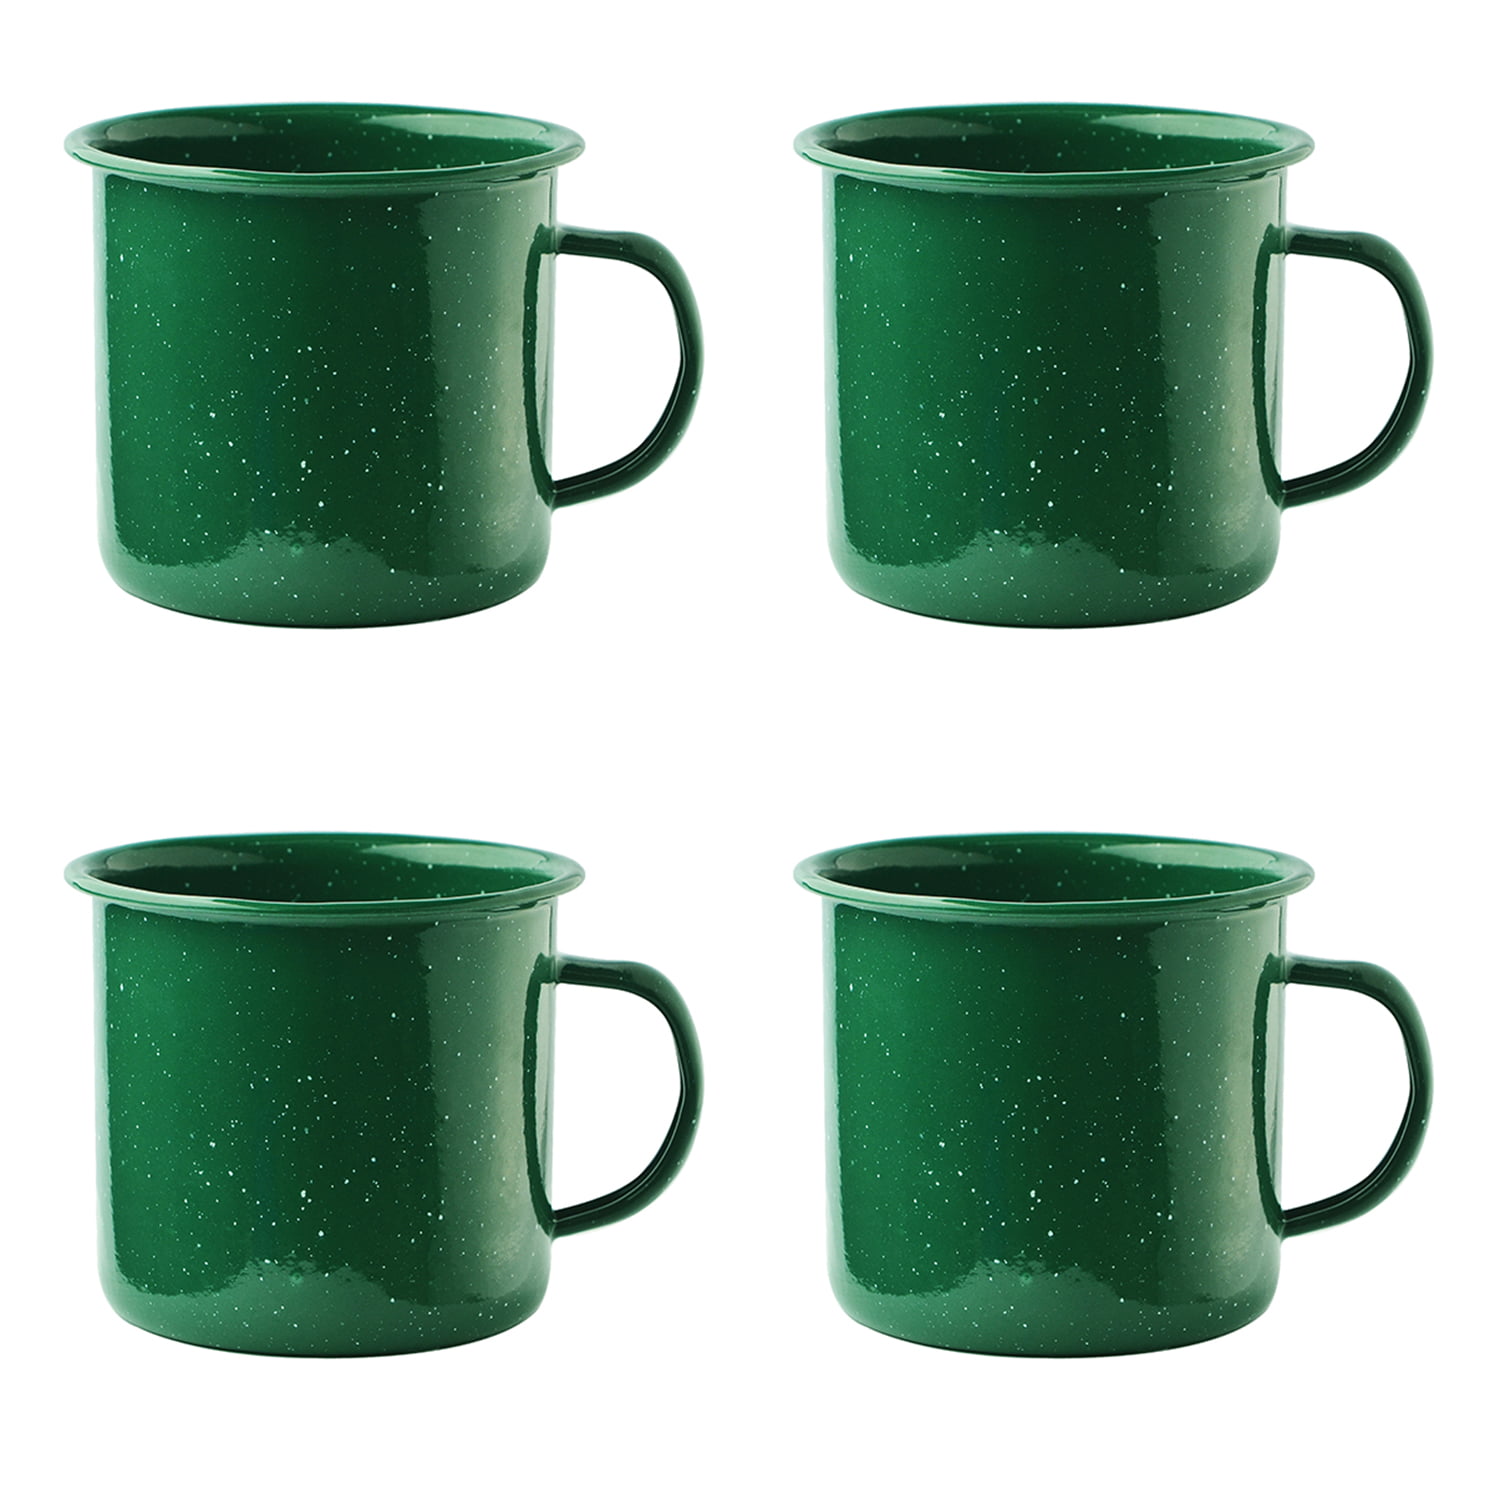 Details about   Green Camping Happily Ever After Mug Green Camper Mug Striped Camper Mug